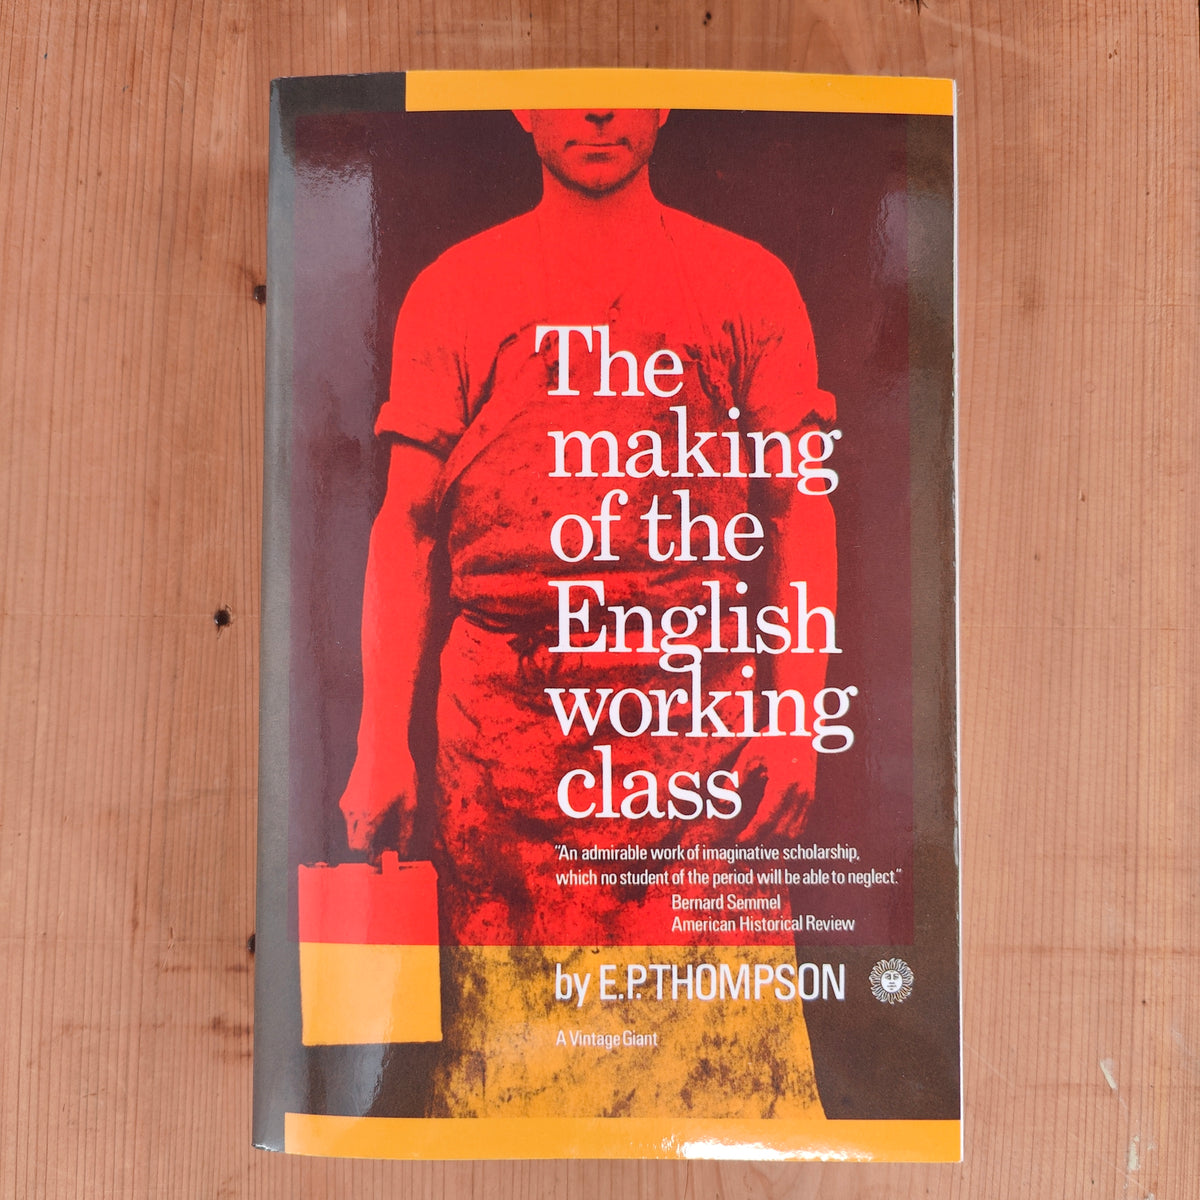 The Making of the English Working Class -  E.P. Thompson